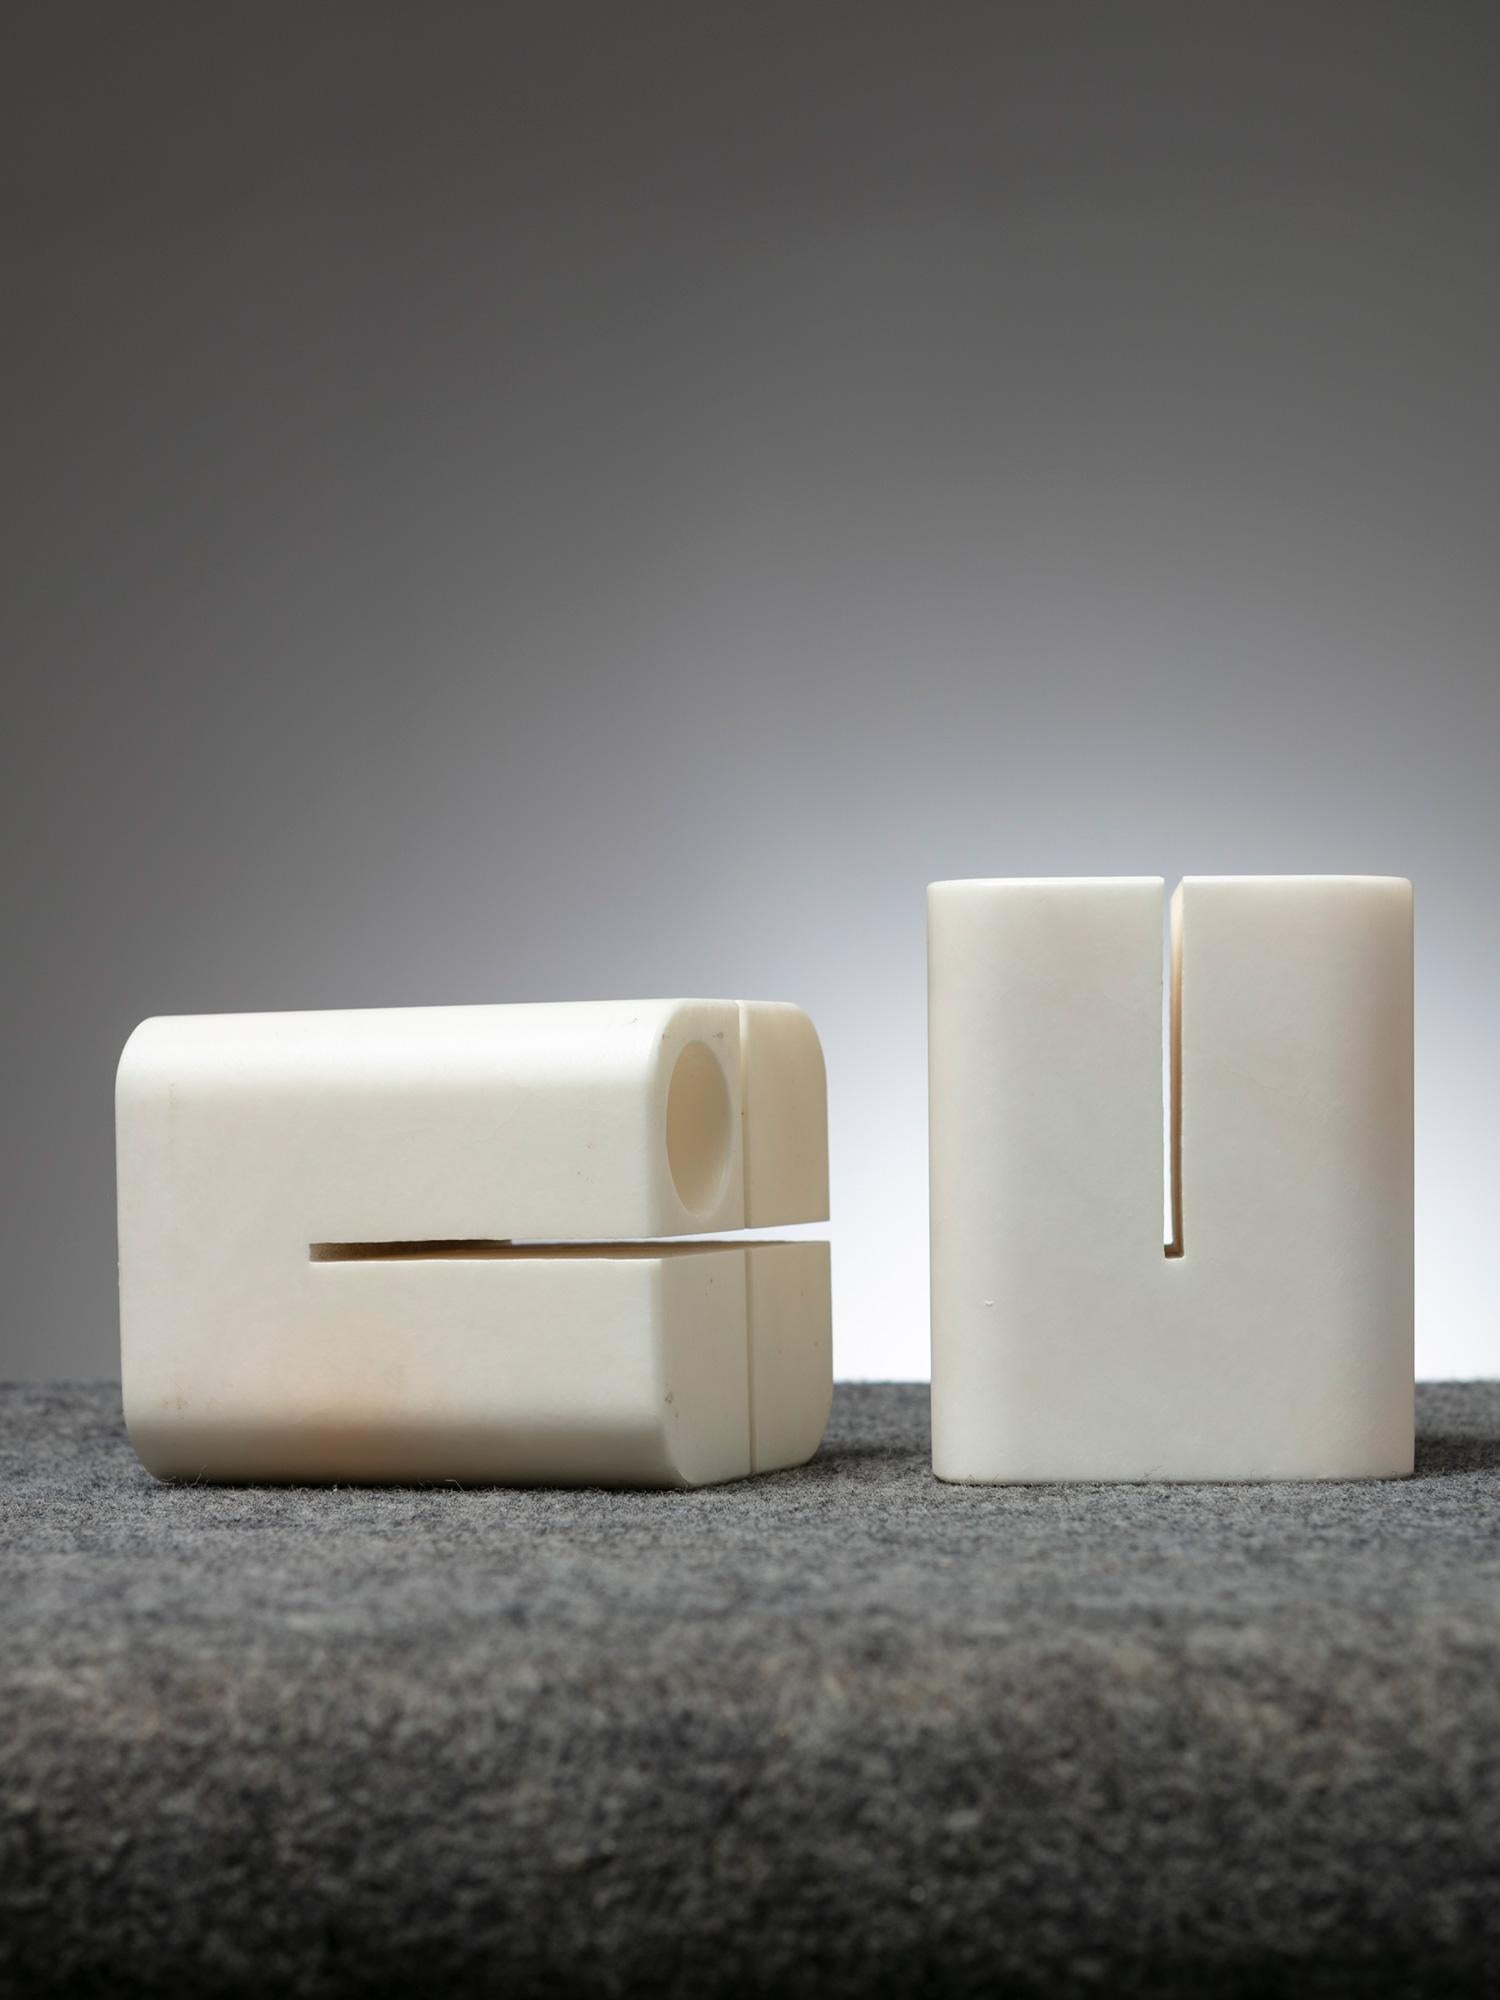 Set of two stone pieces by Lelo Cremonesi.
Two orthogonal cuts and a round hole for several possible functions.